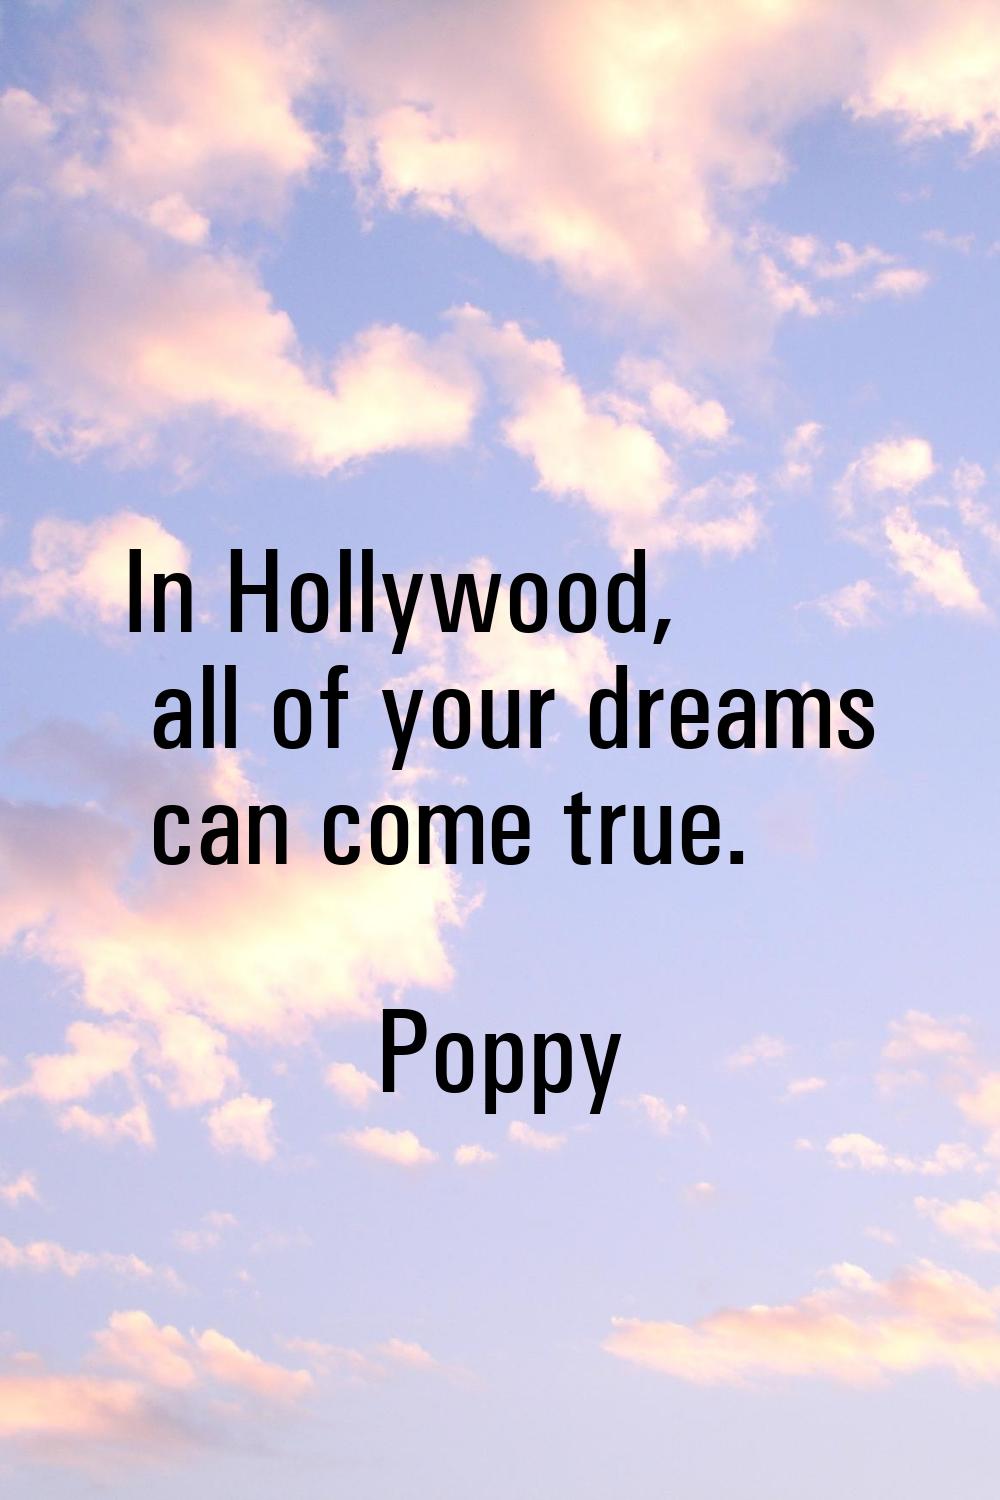 In Hollywood, all of your dreams can come true.